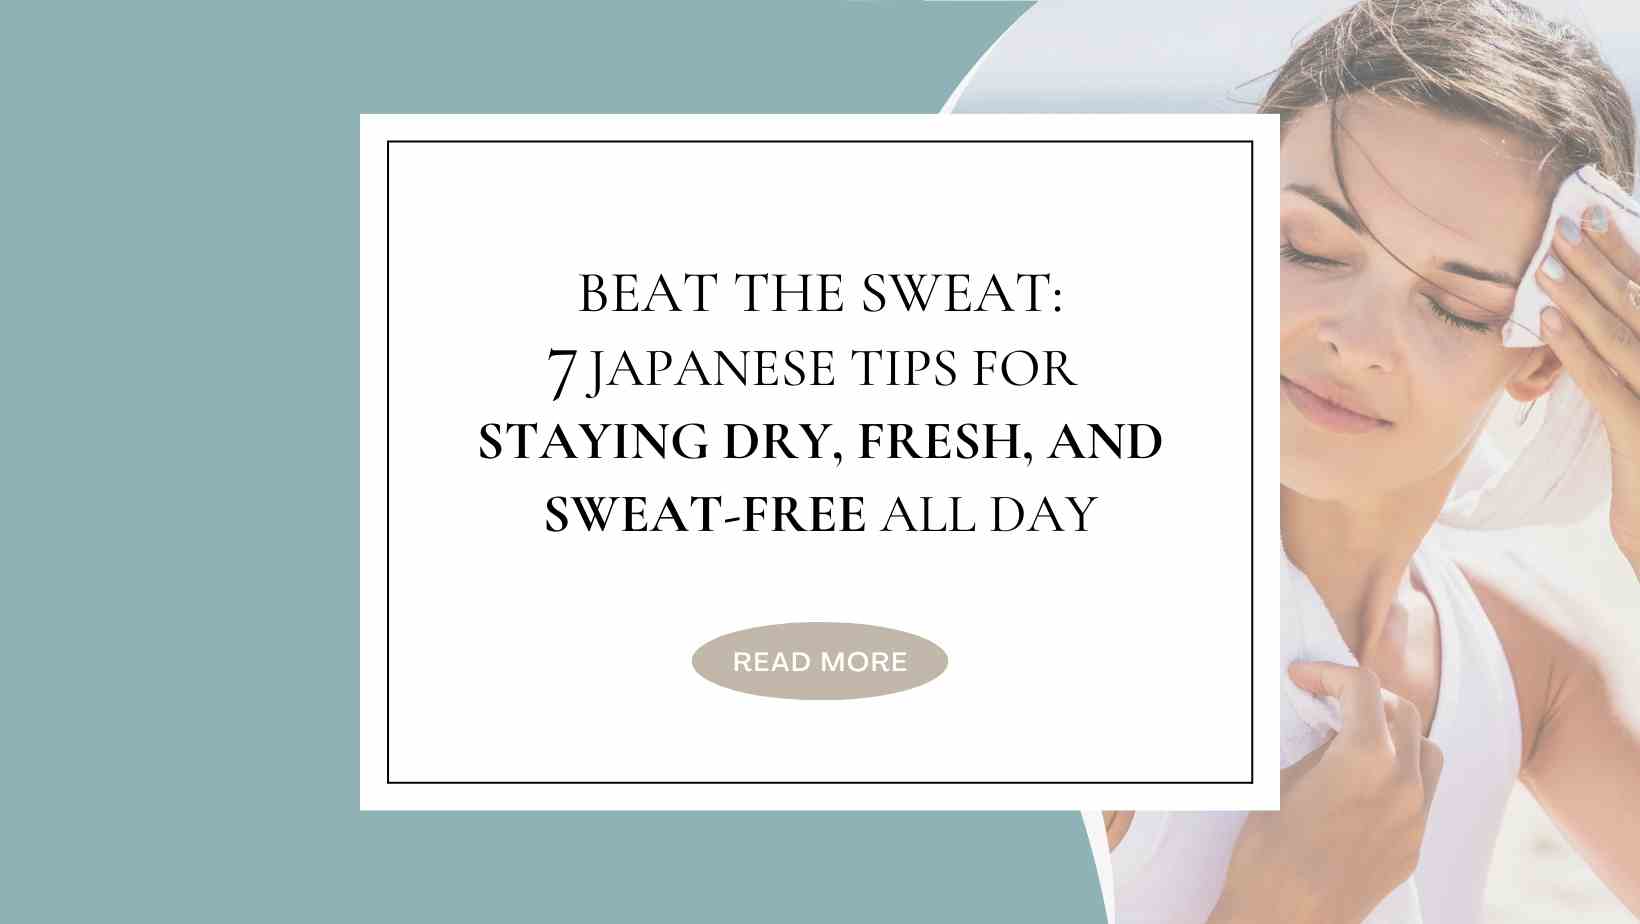 How To Stay Dry And Deal While Dealing With Summer Sweat